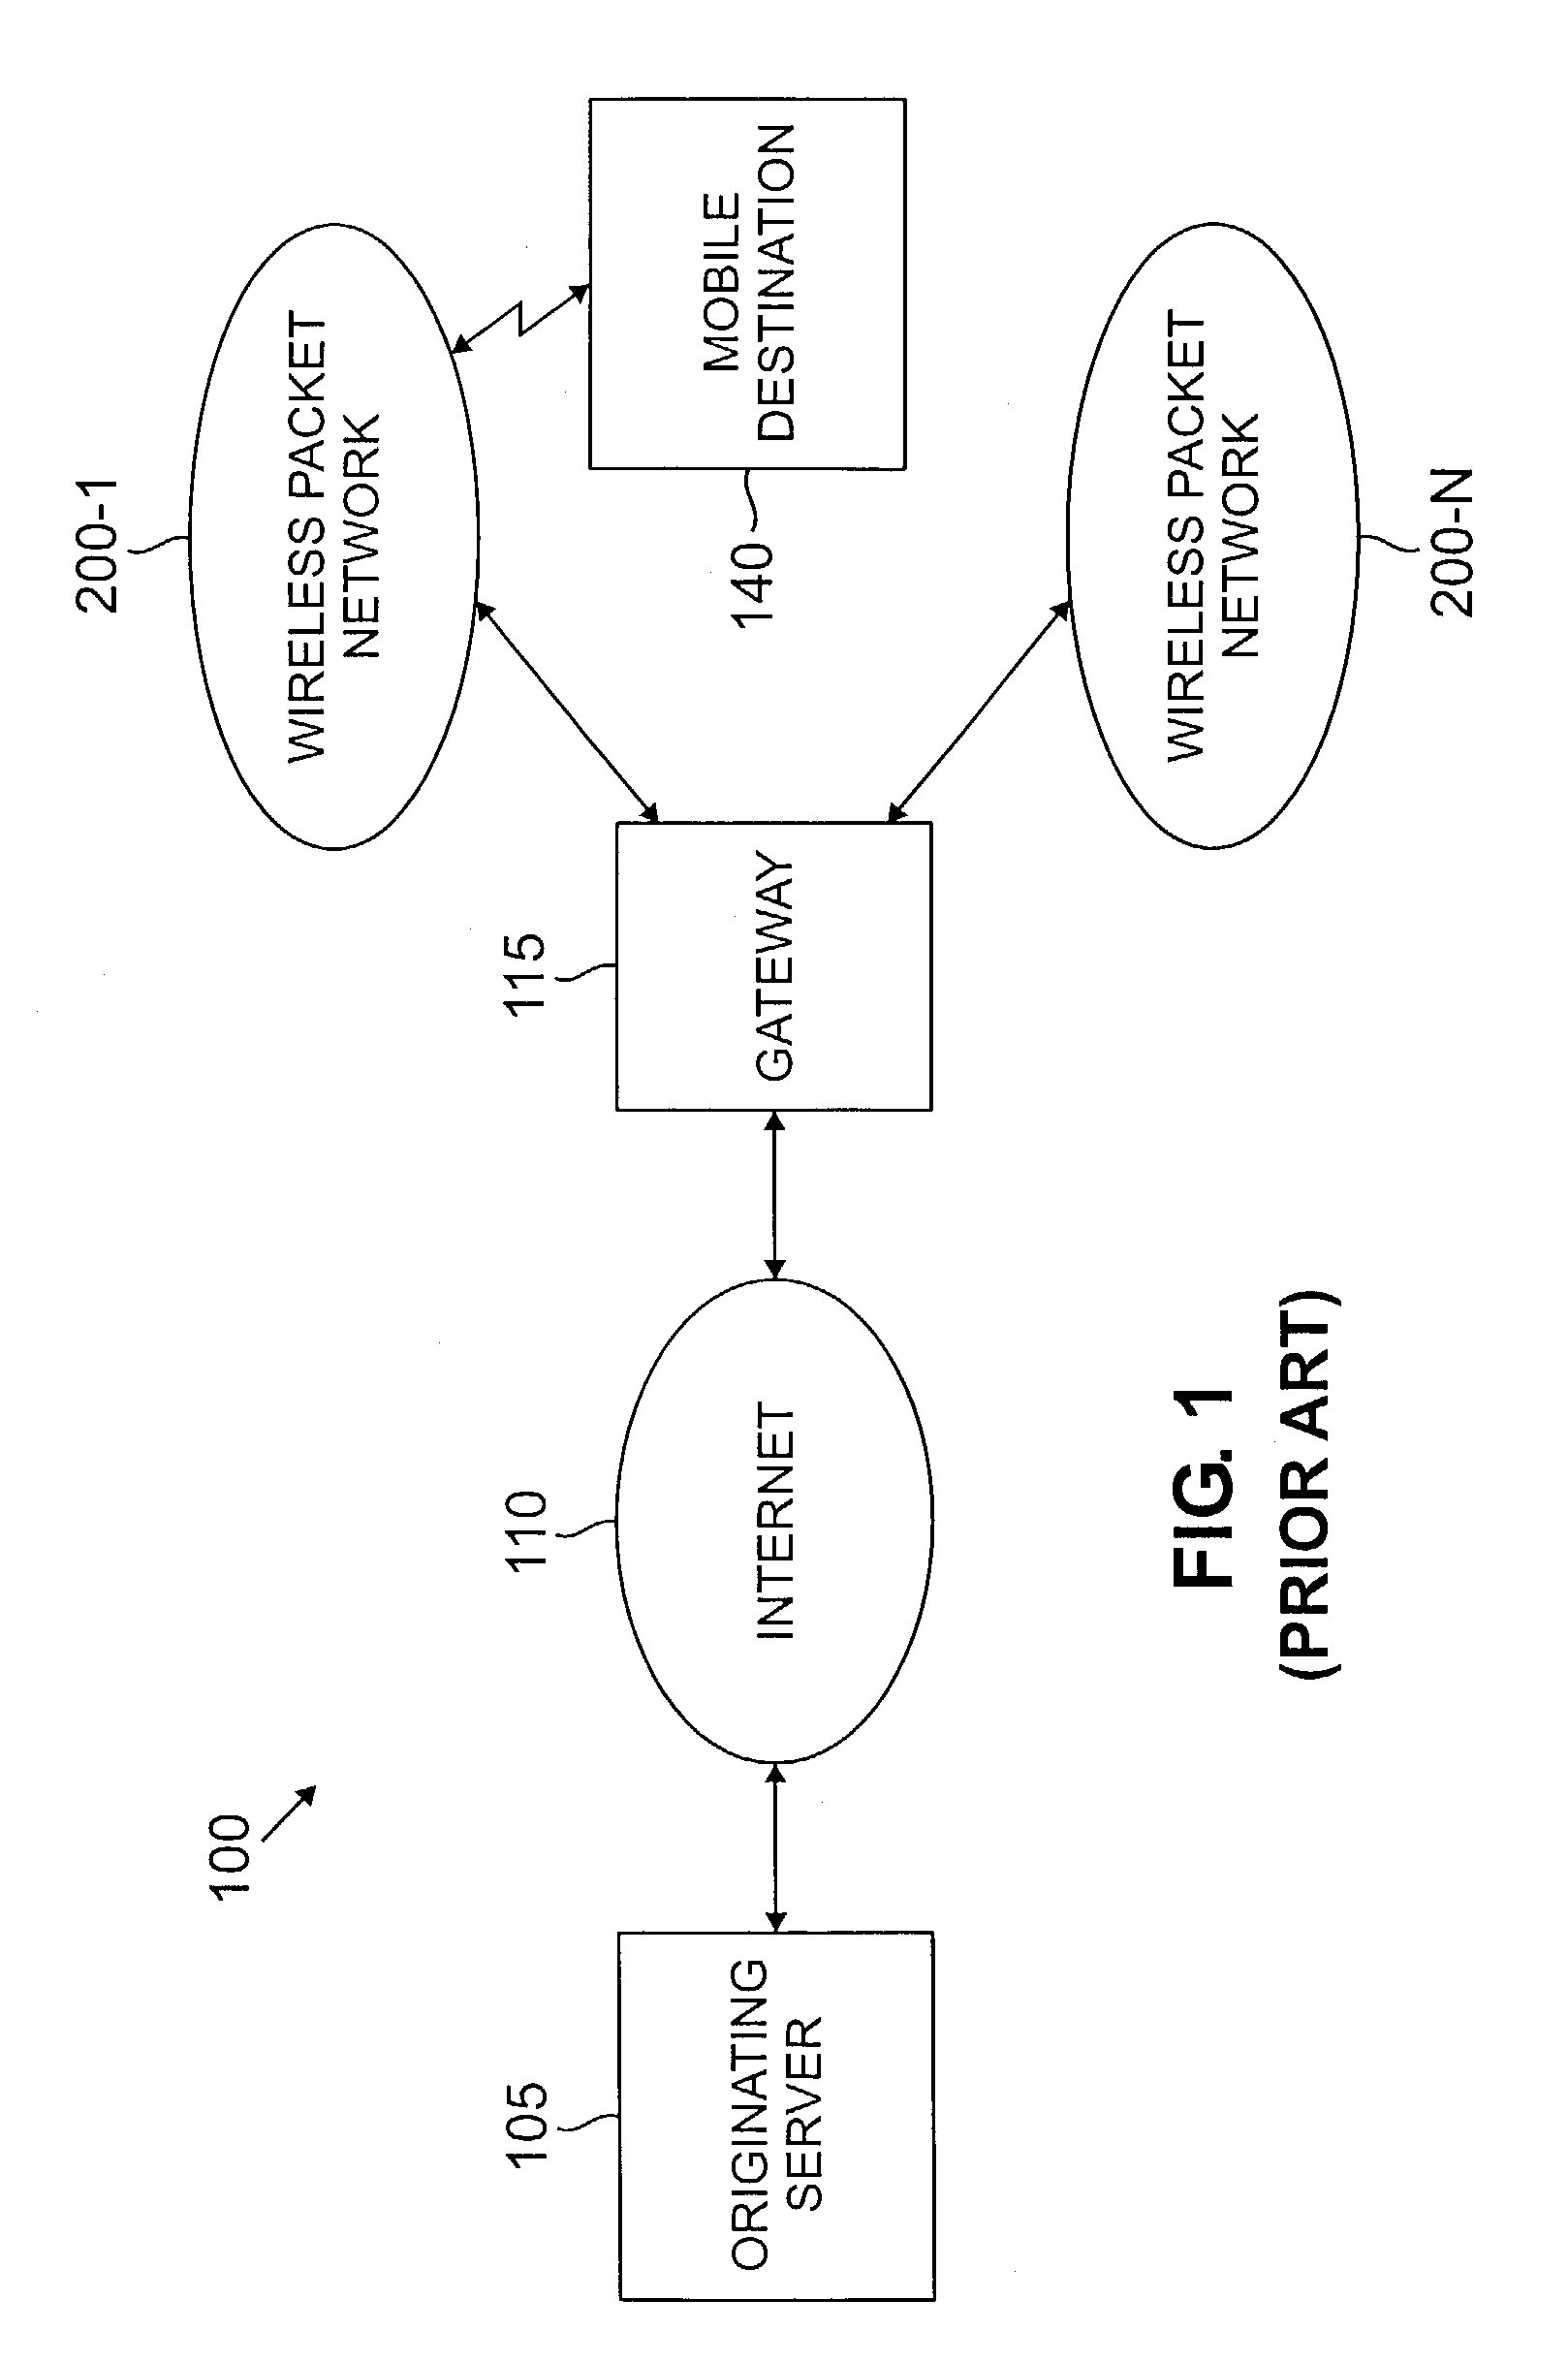 Complete user datagram protocol (CUDP) for wireless multimedia packet networks using improved packet level forward error correction (FEC) coding